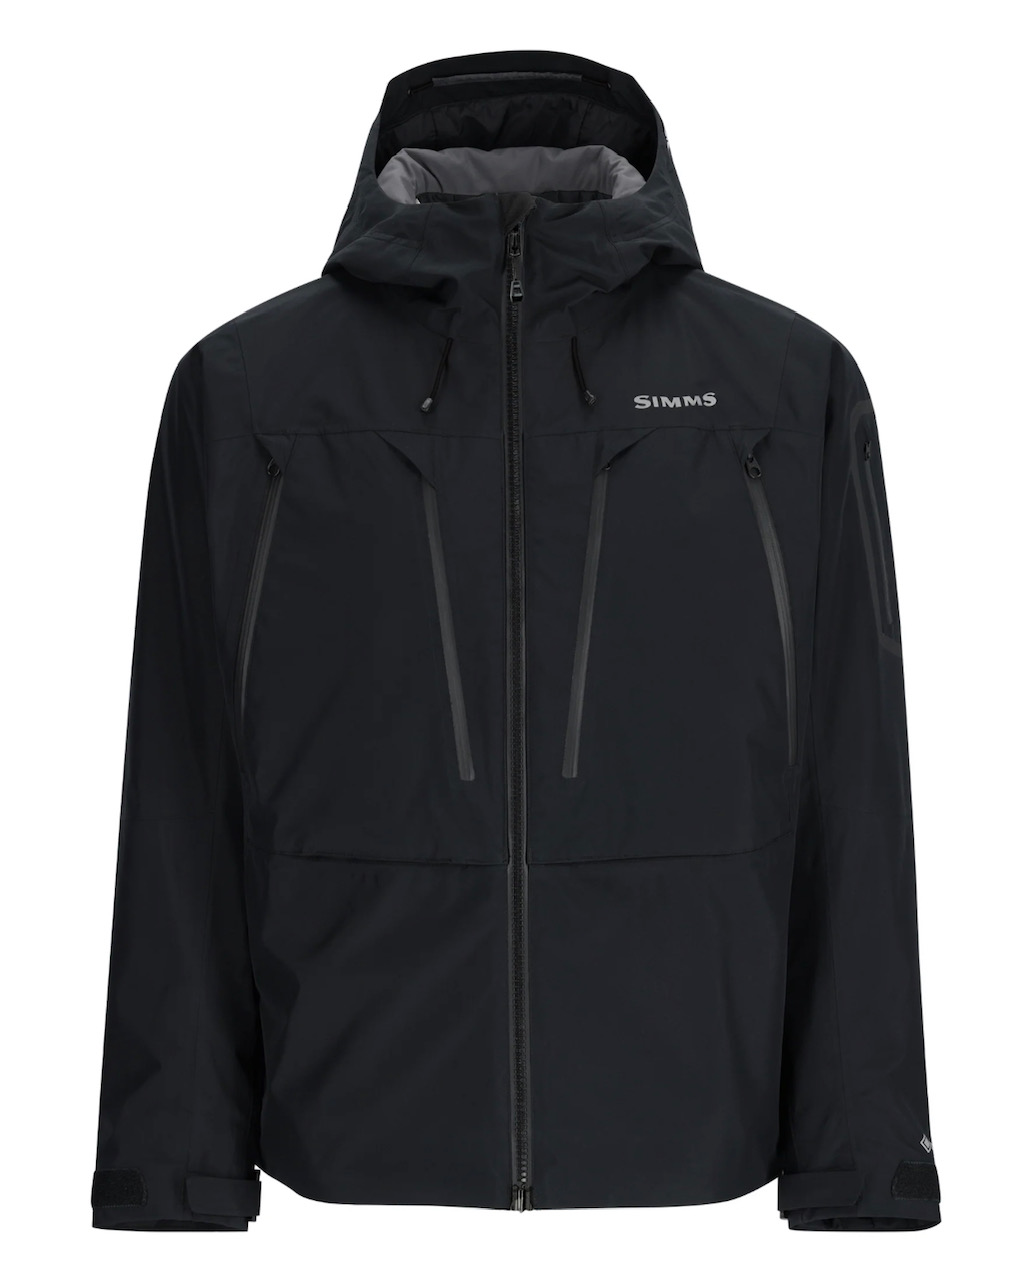 Simms M's Bulkley Insulated Jacket - Black - XL